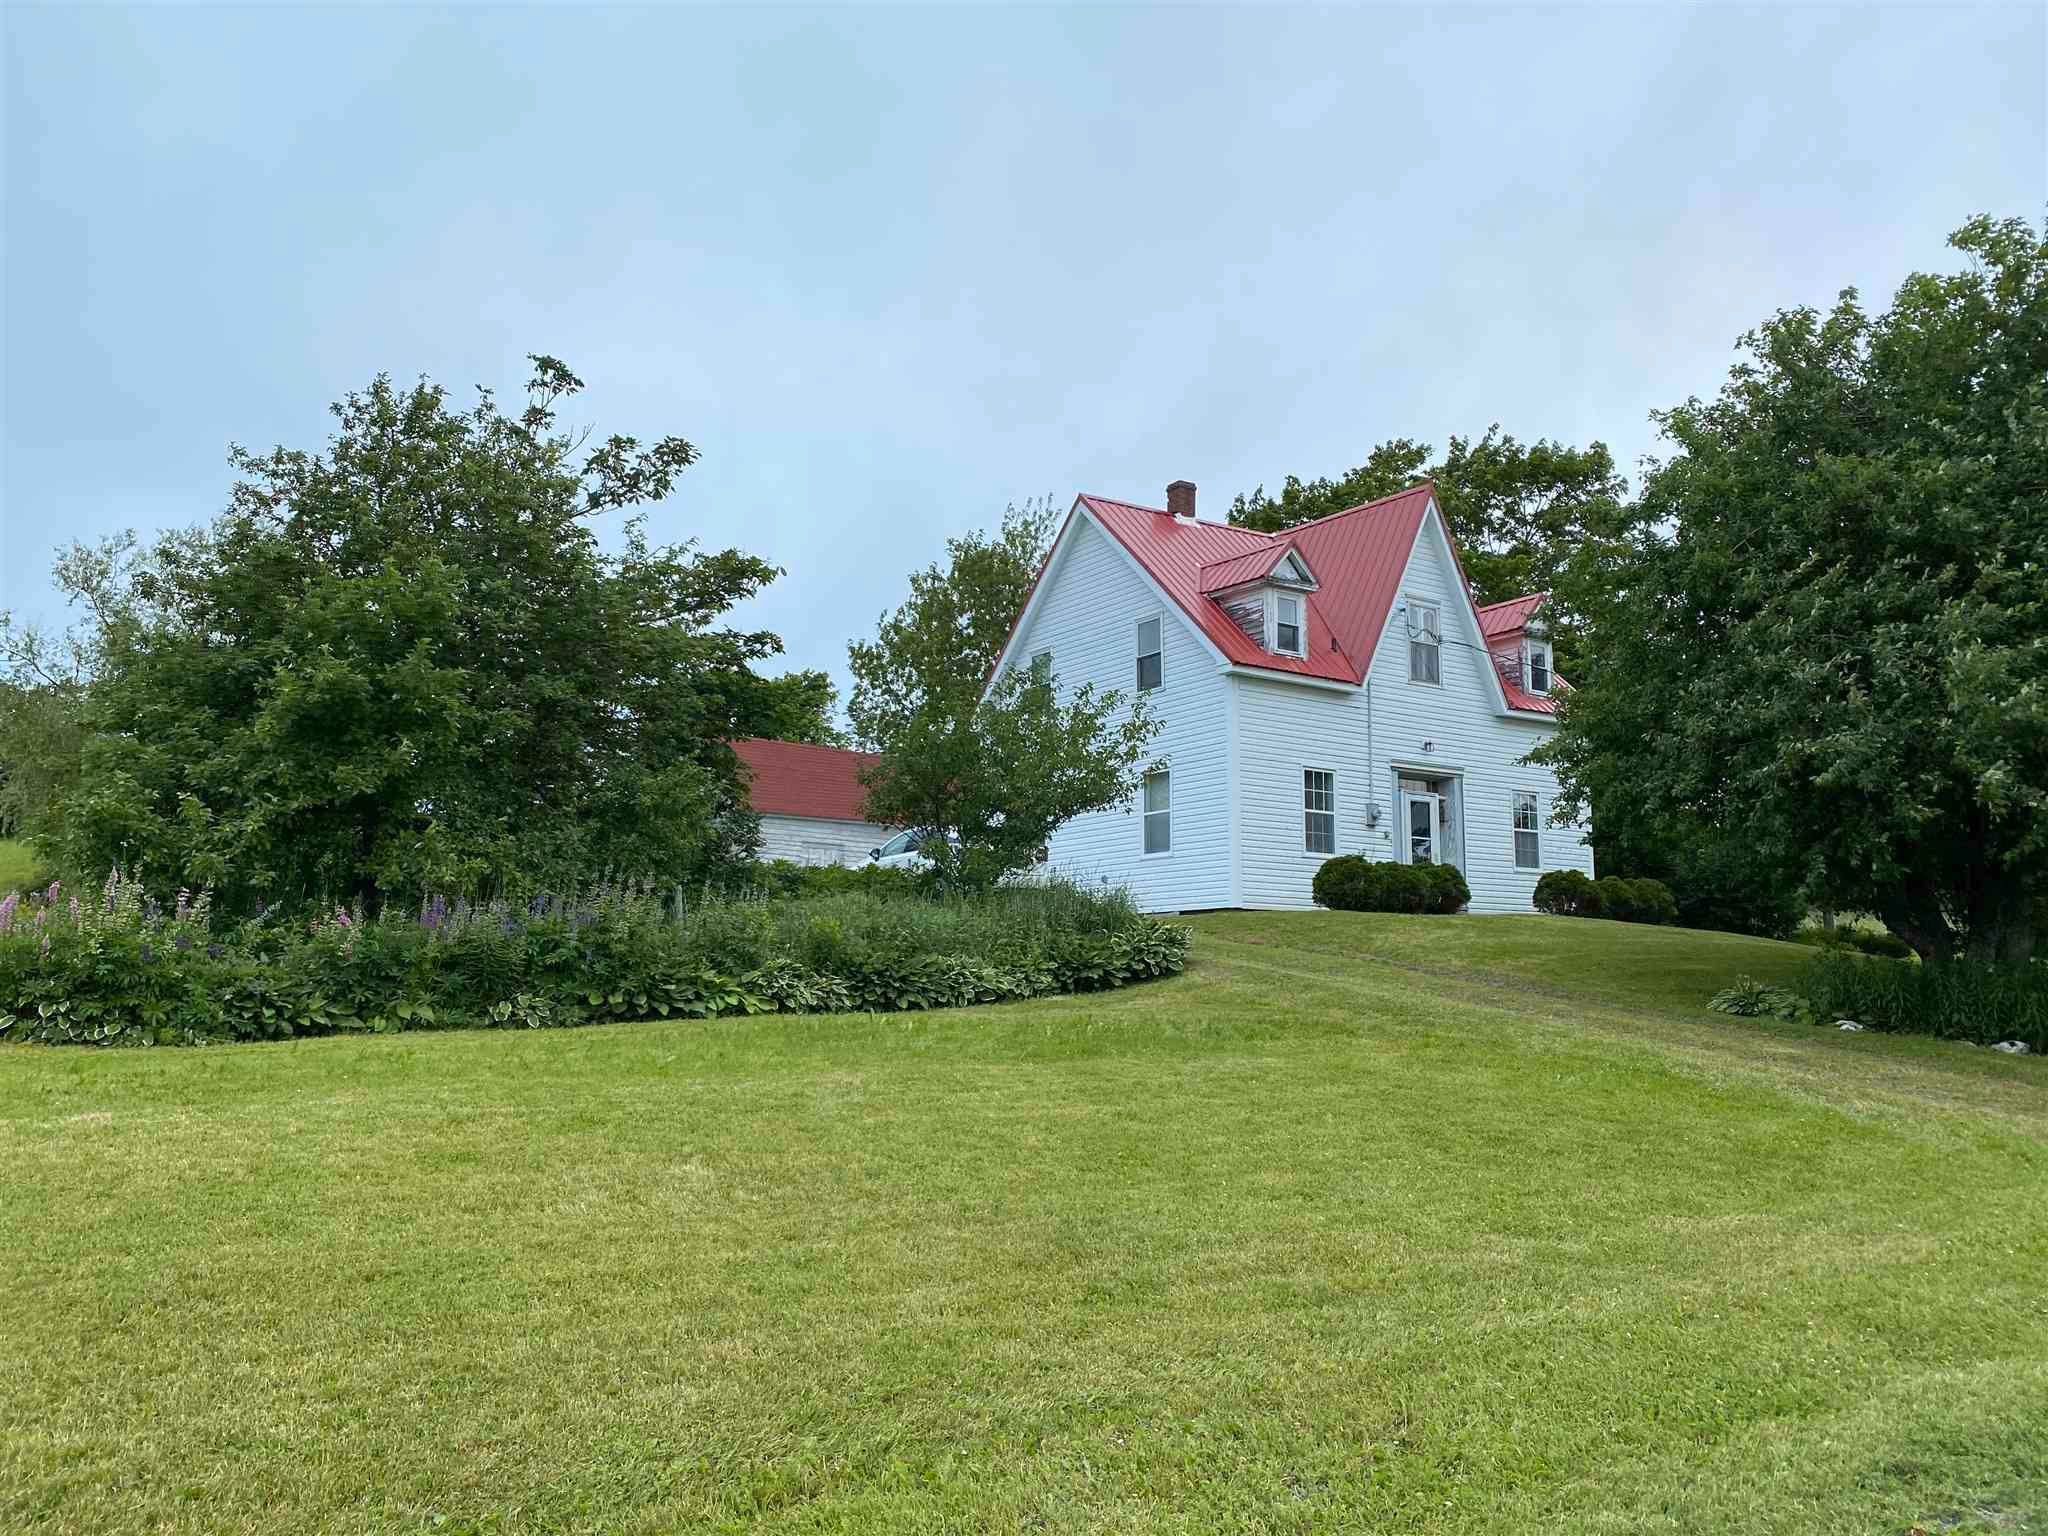 Main Photo: 519 JW MCCULLOCH Road in Meiklefield: 108-Rural Pictou County Farm for sale (Northern Region)  : MLS®# 202117518